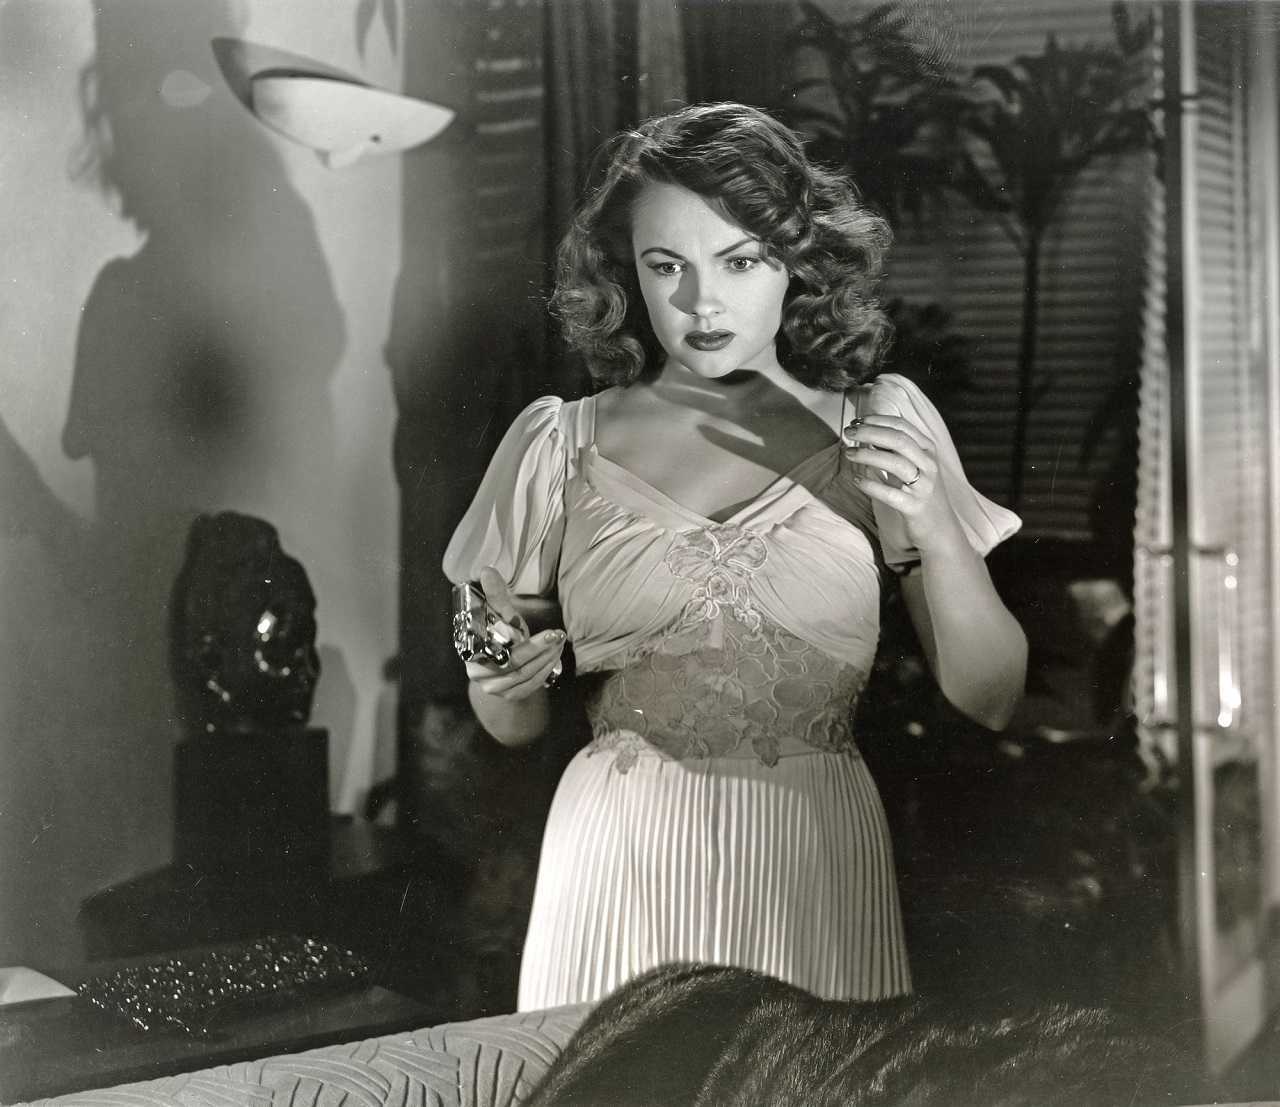 Joan Leslie shoots her husband in Repeat Performance (1947)